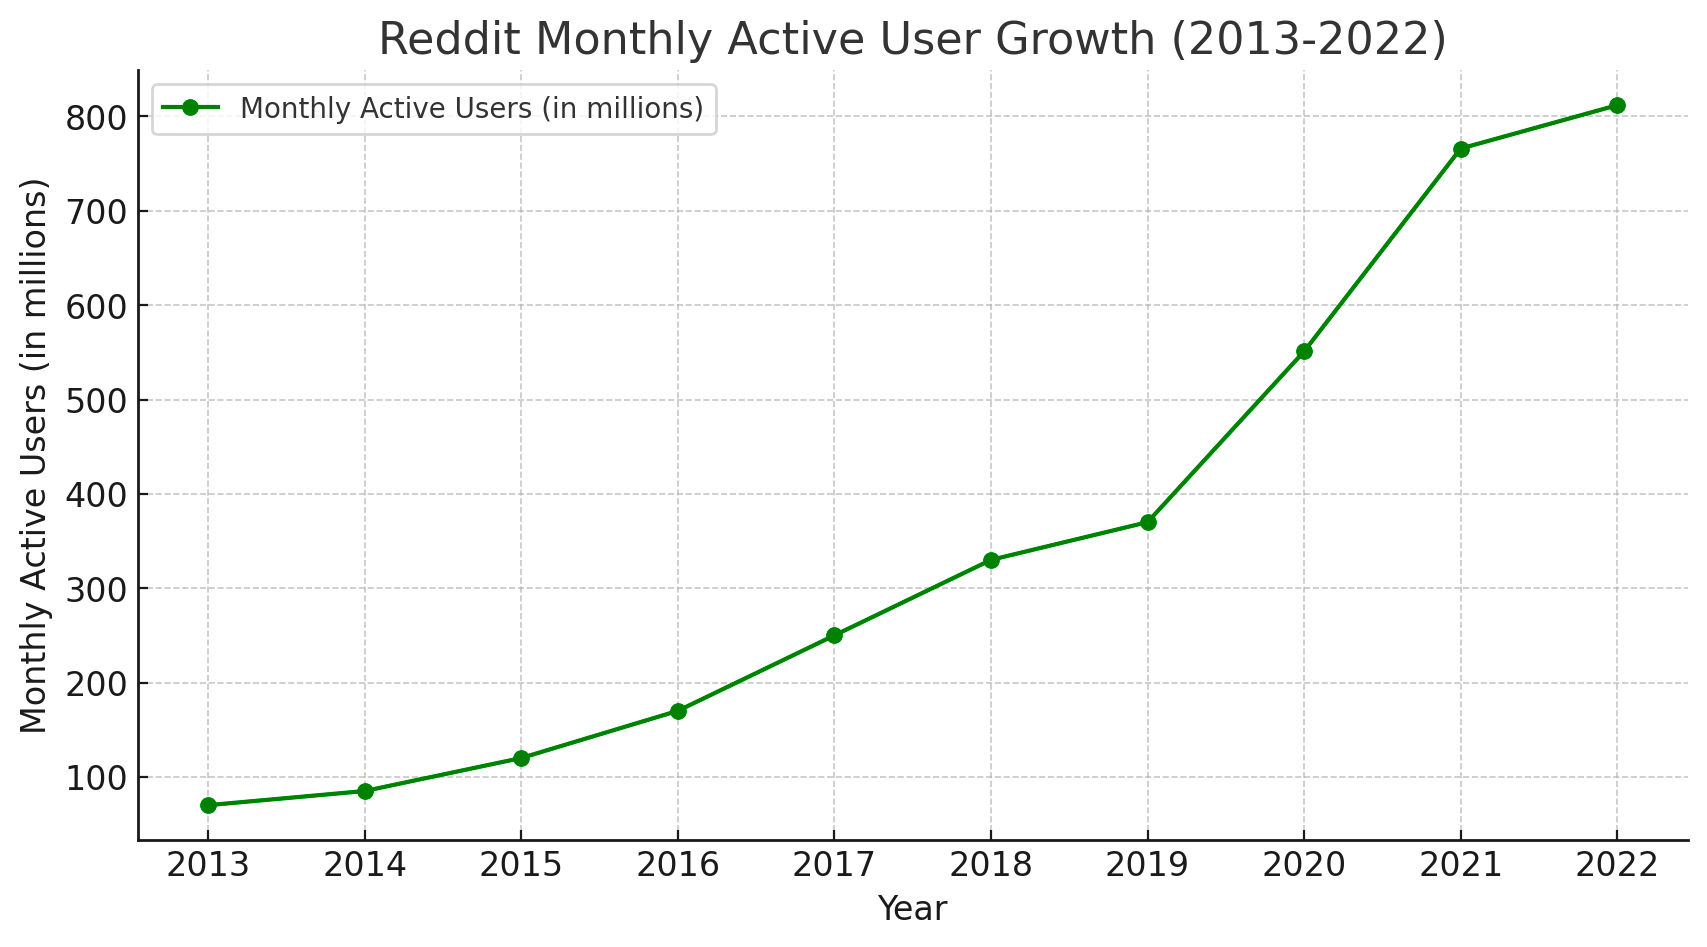 Reddit monthly active users from 2013 to 2022